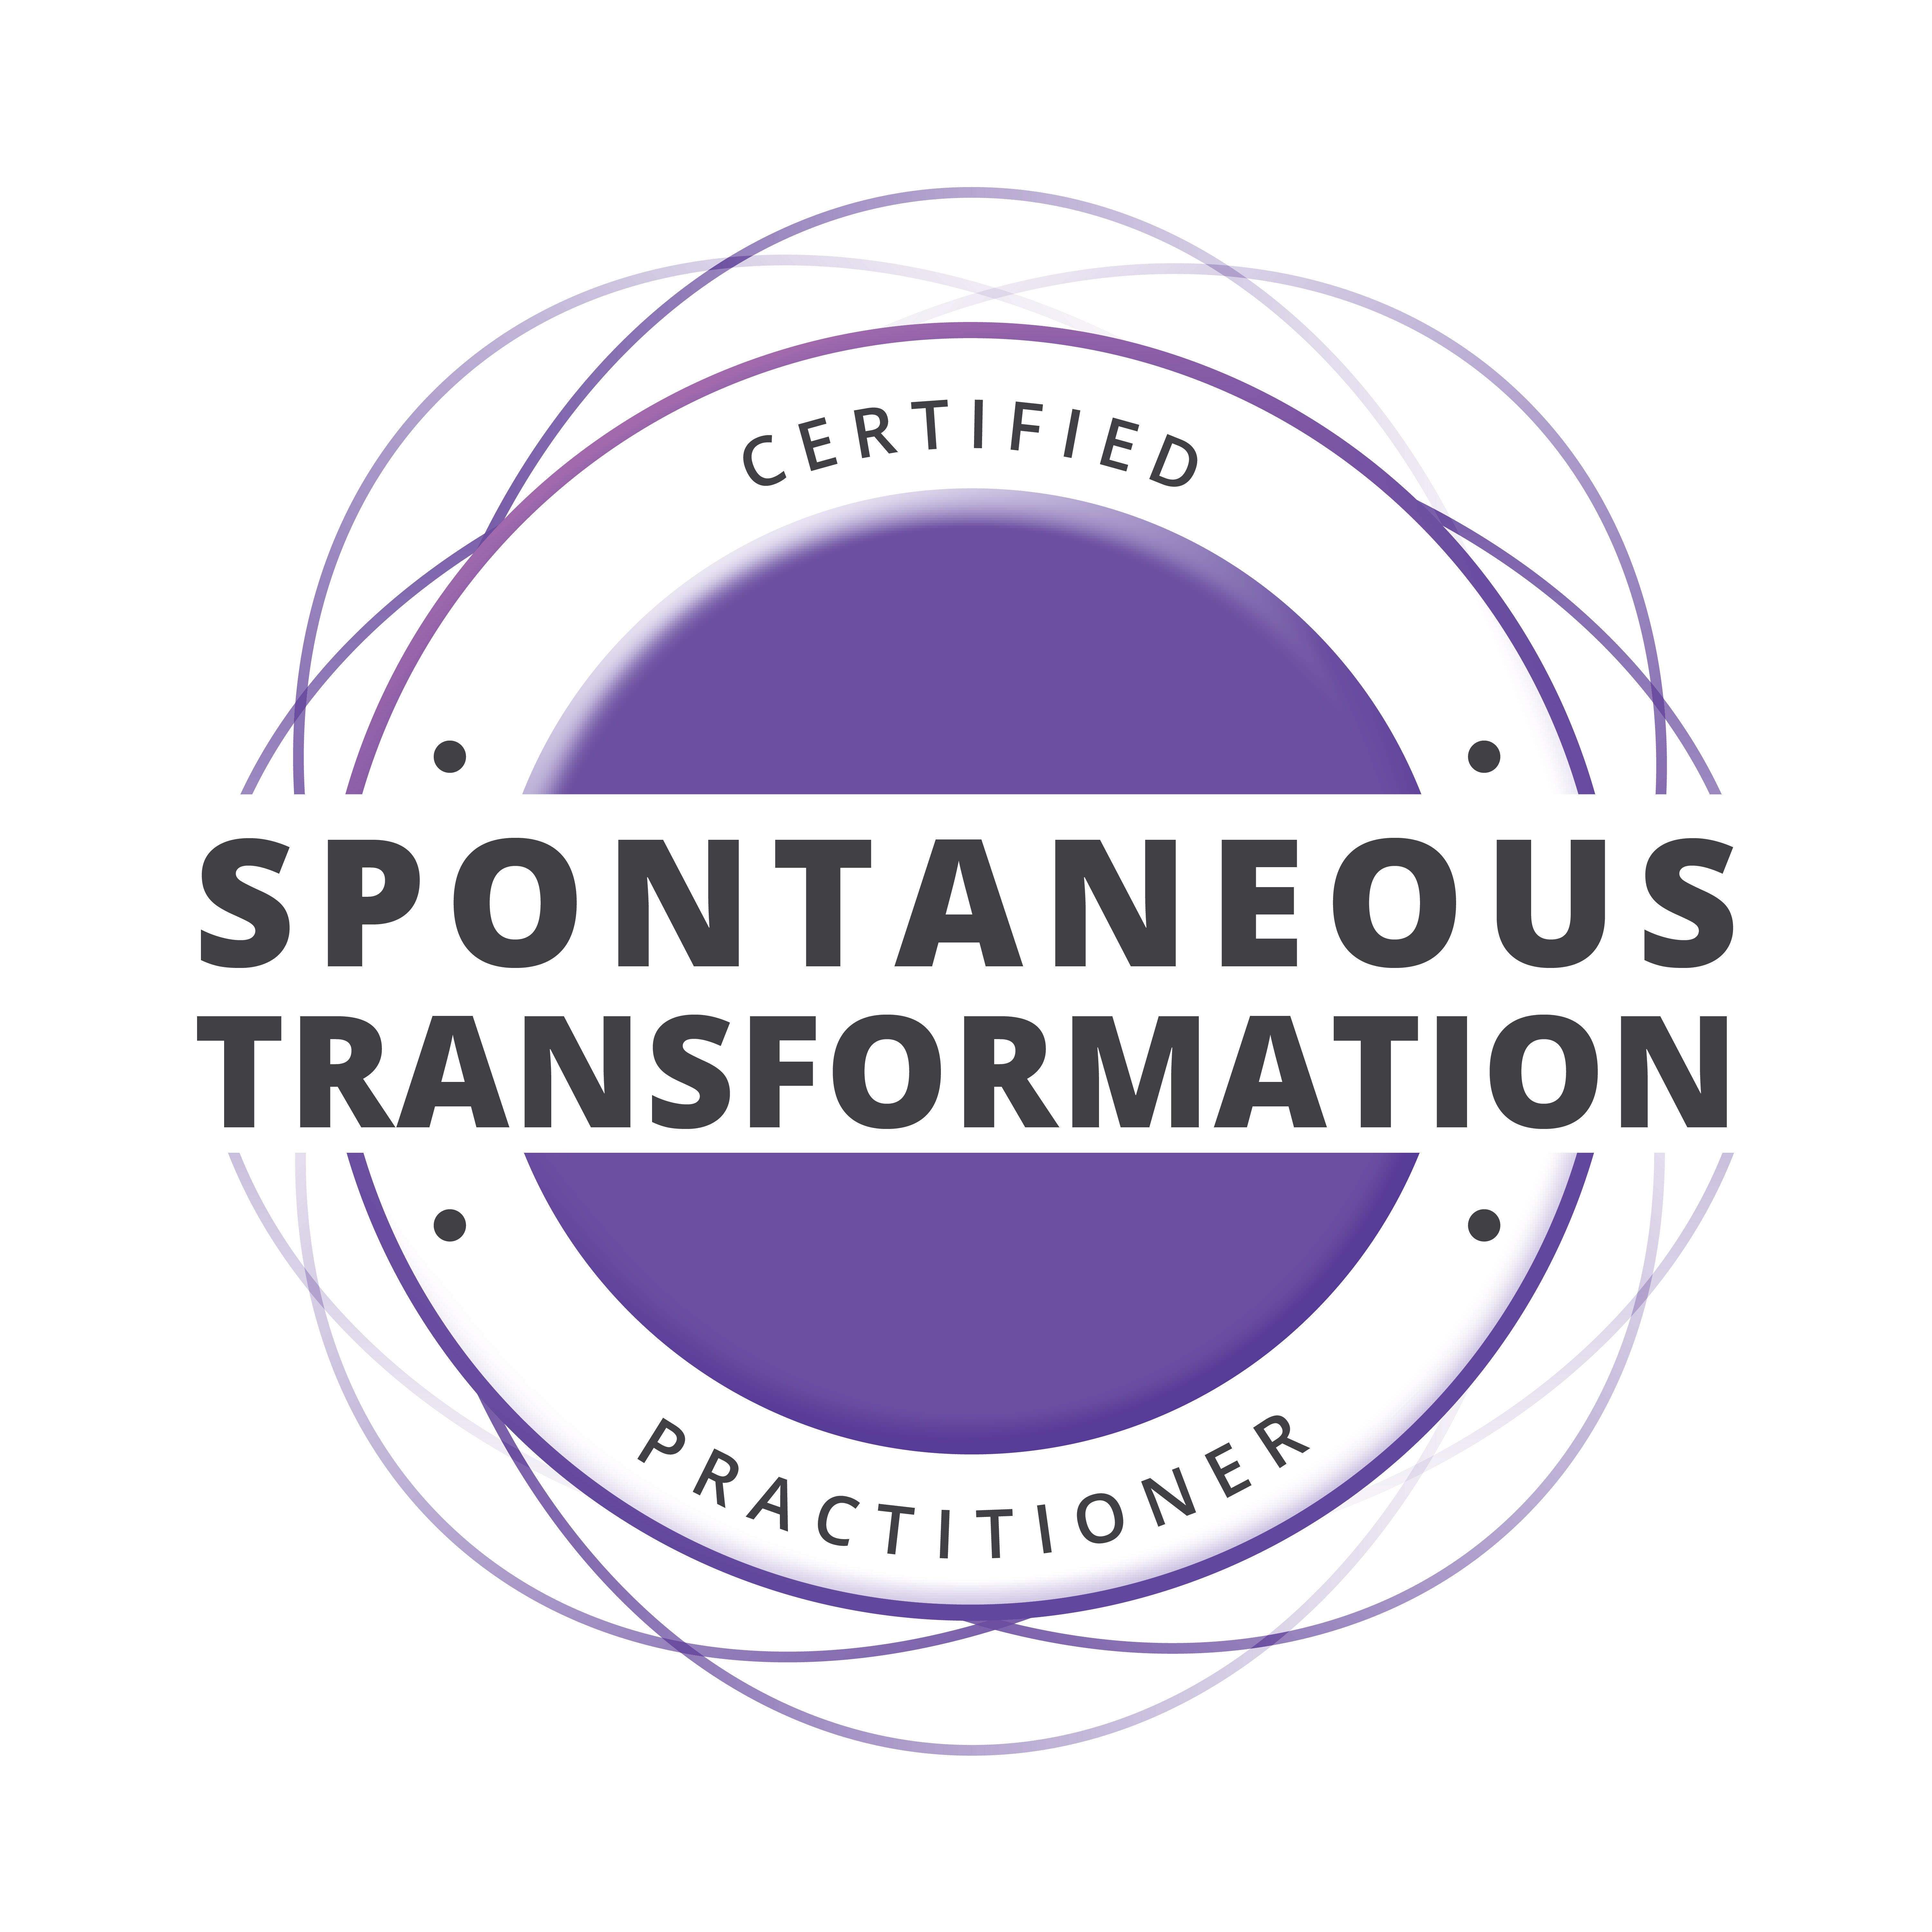 Certified Spontaneous Transformation Practitioner